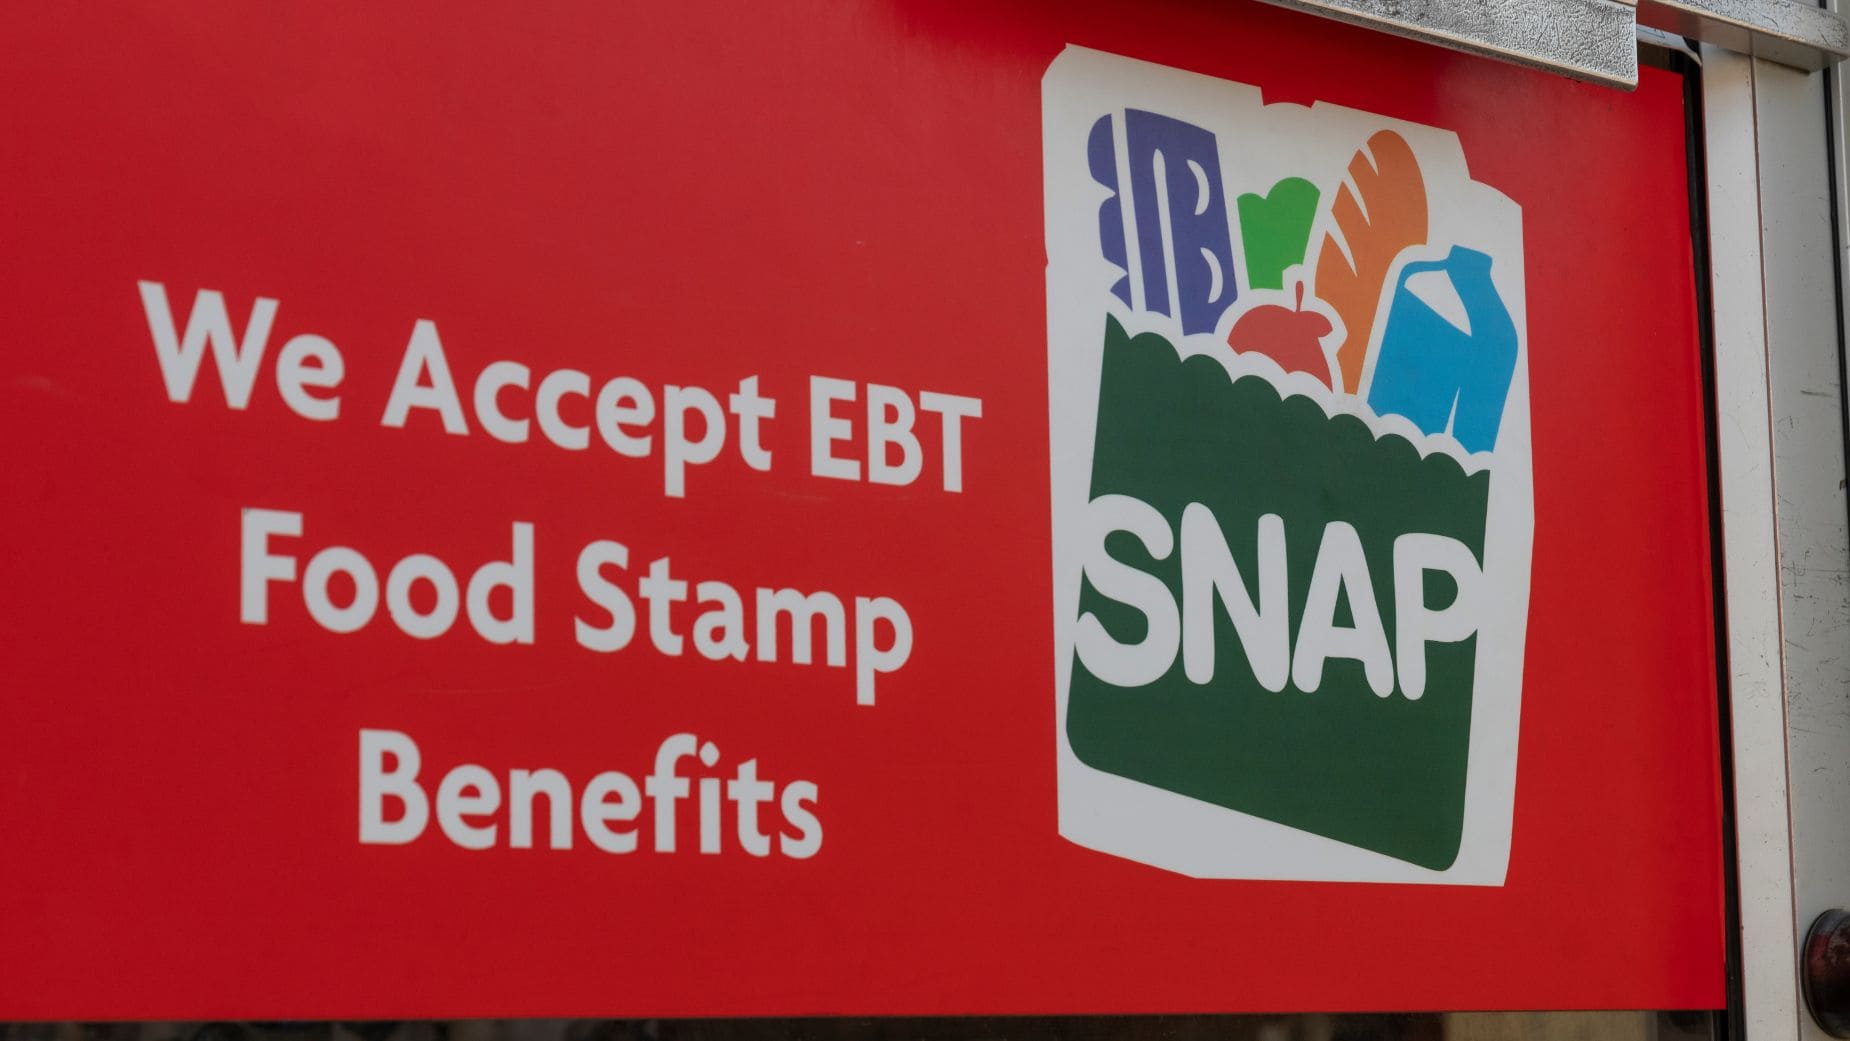 Find out if you can get SNAP Food Stamps and Supplemental Security Income at the same time